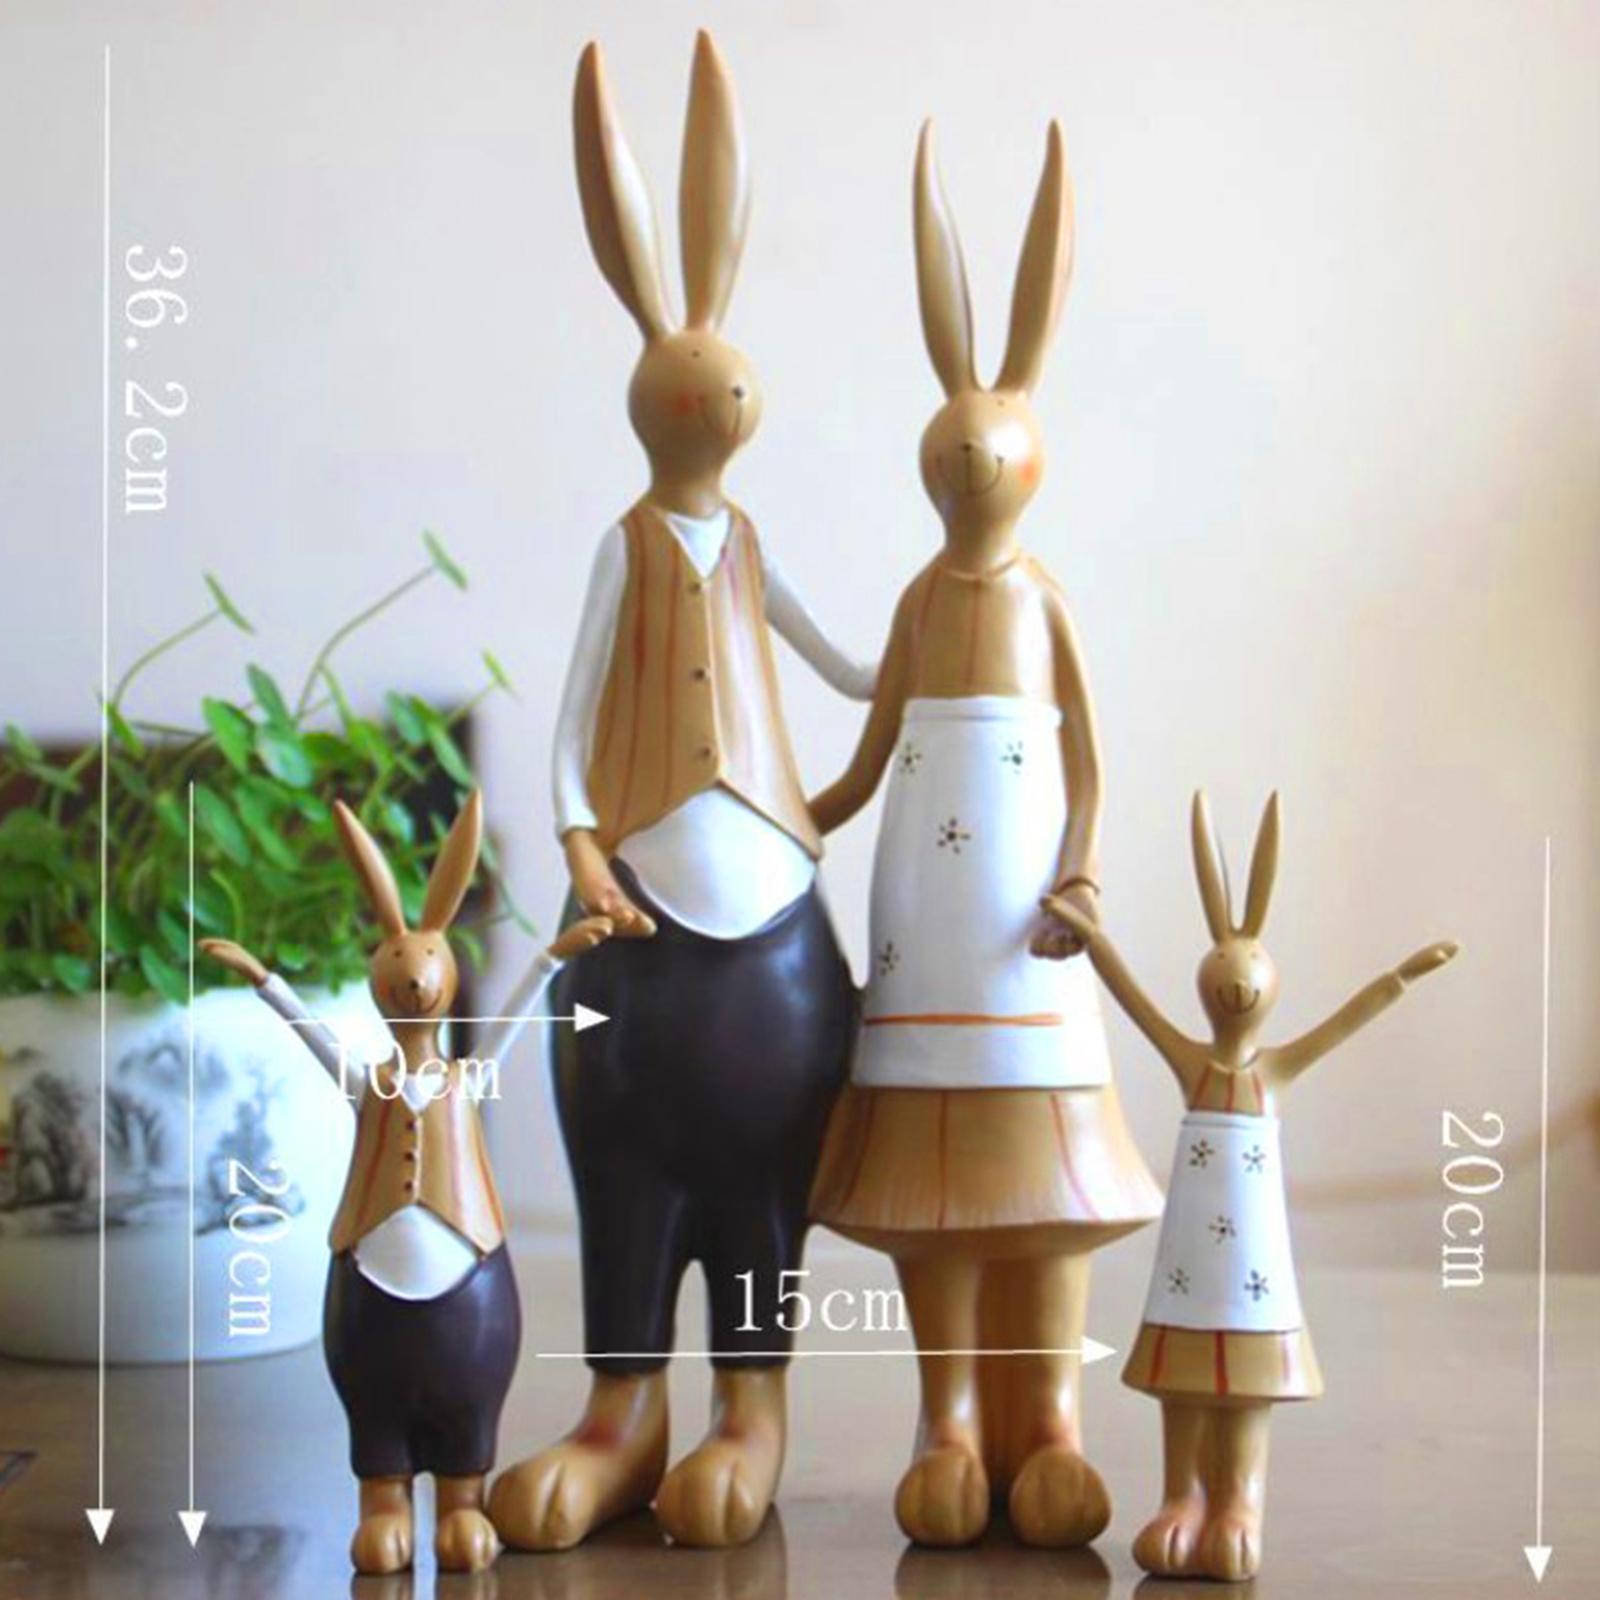 Home Decorative Rabbit Family Figurine Statue,Animal Statue Collectible Bedroom Figurine Statue for Home Cabinet Book Shelf Office